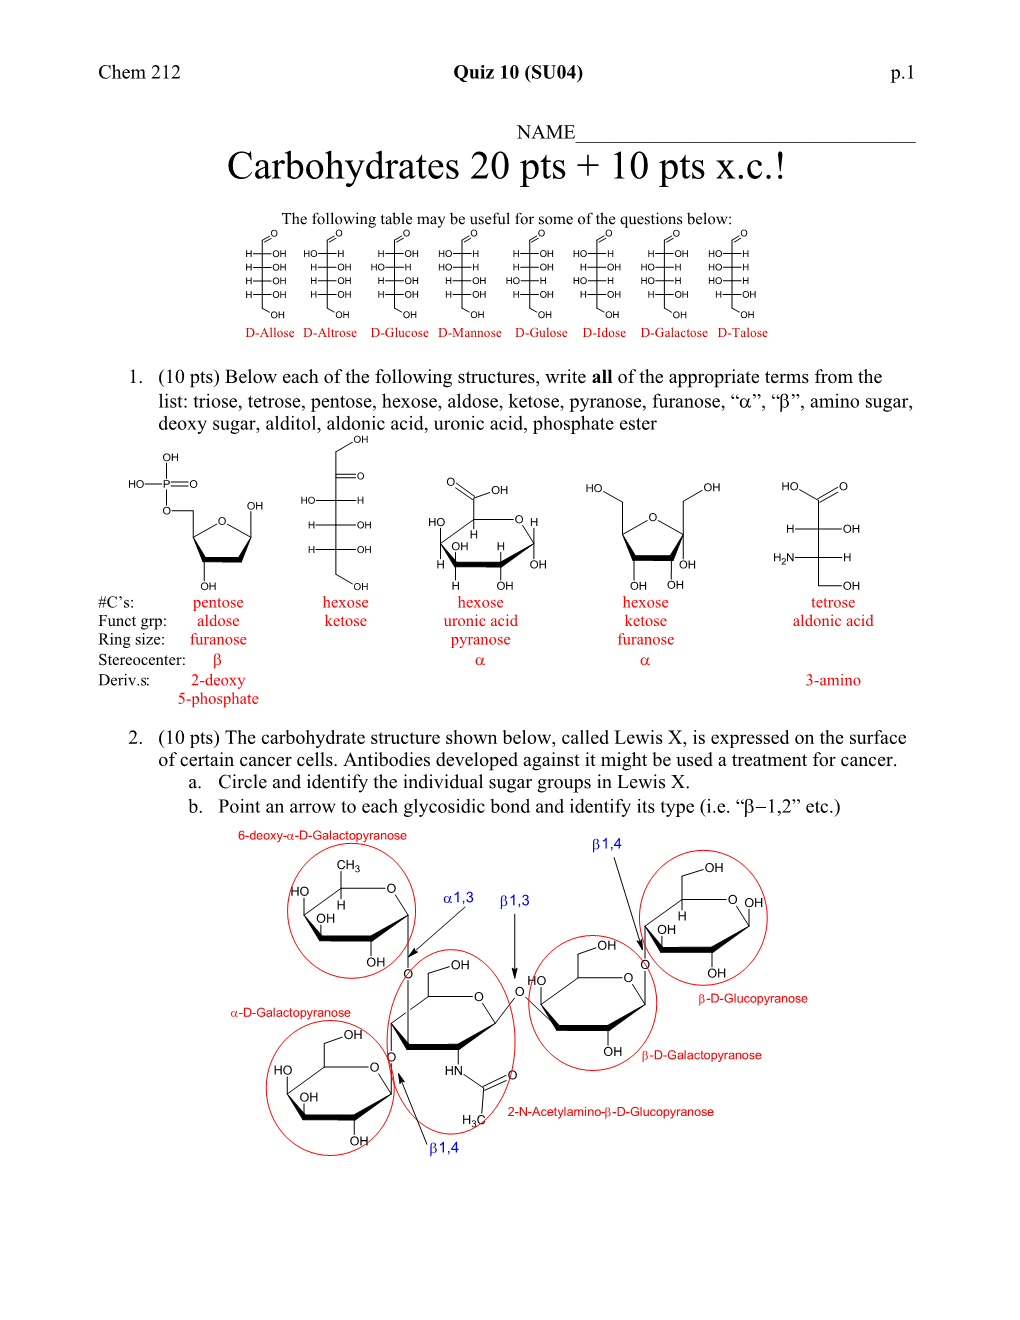 Carbohydrates 20 Pts + 10 Pts X.C.!